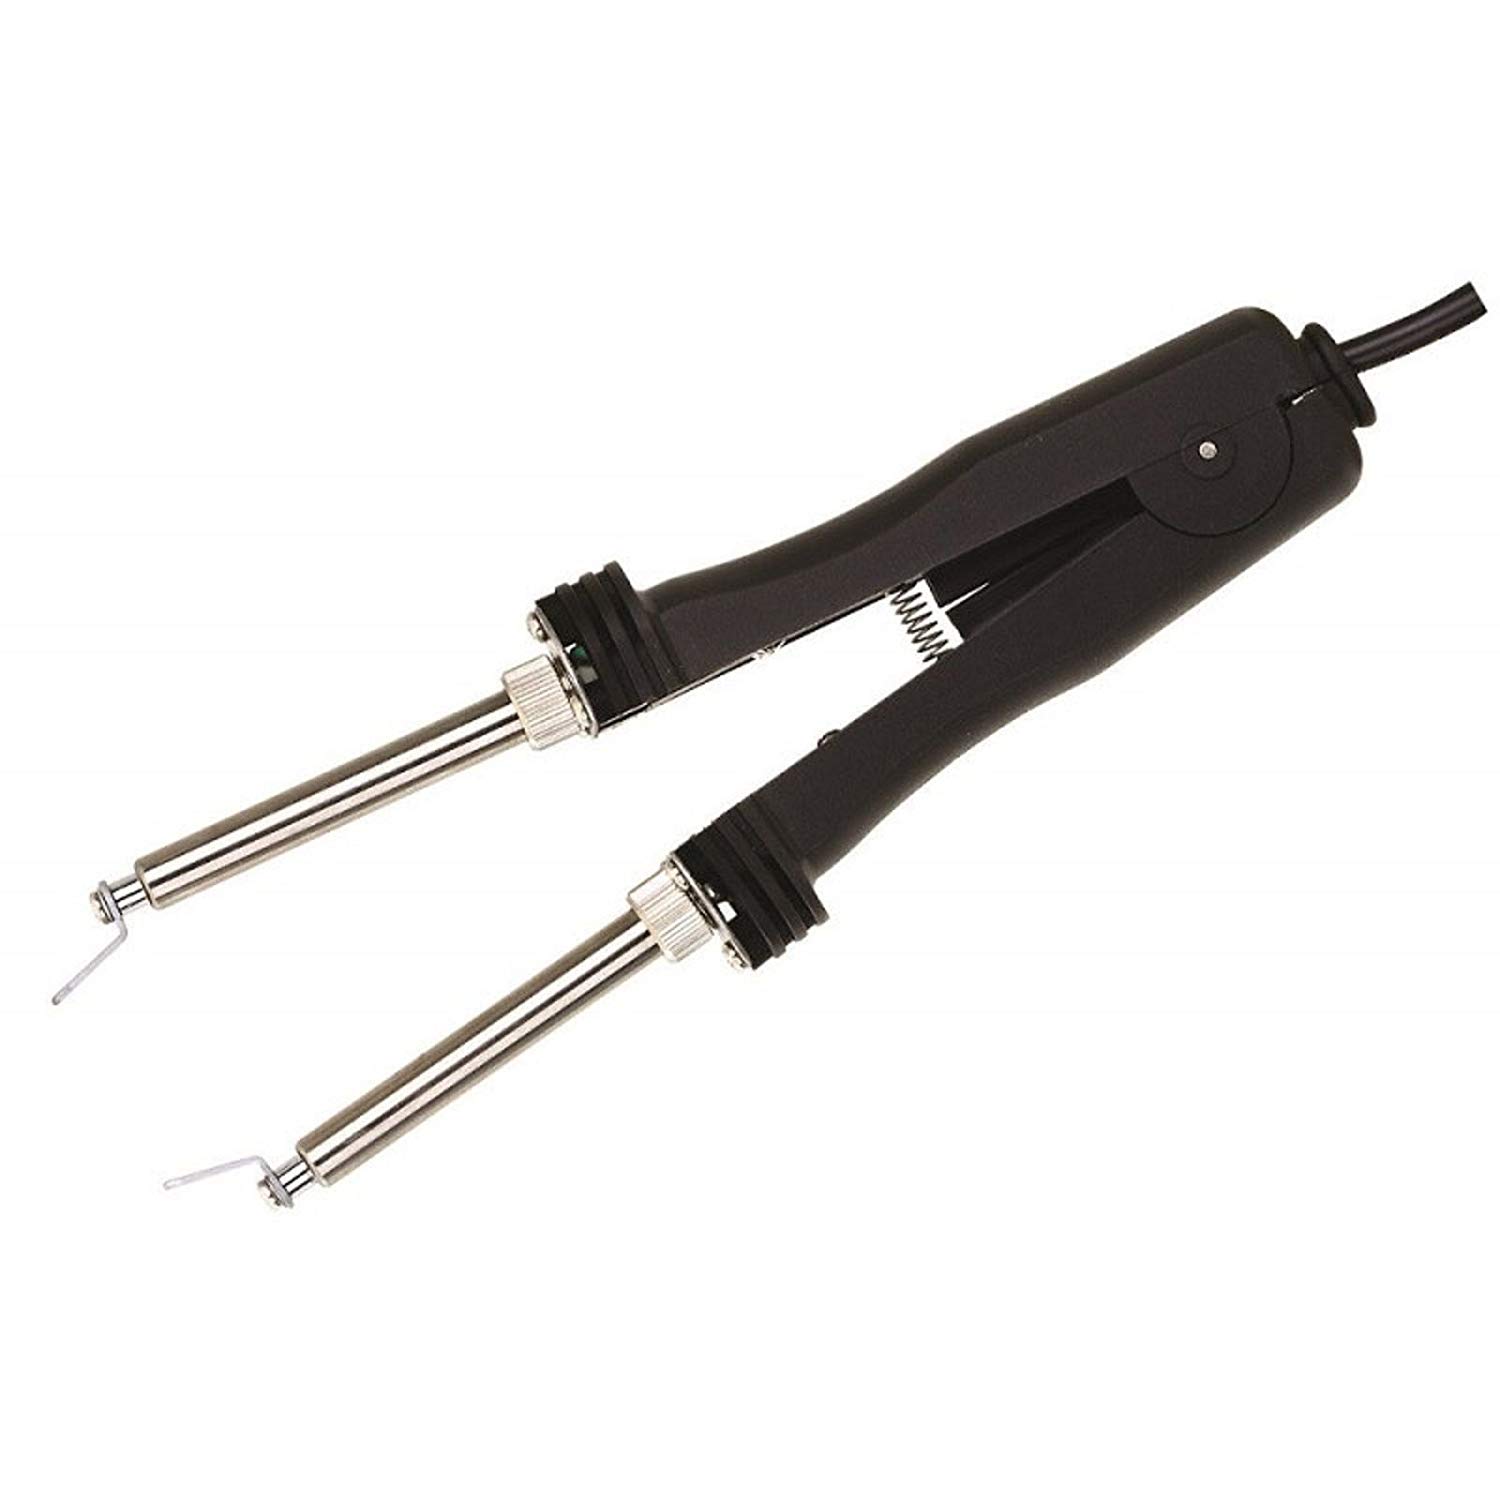 Tweezer Style Soldering Iron for SMD